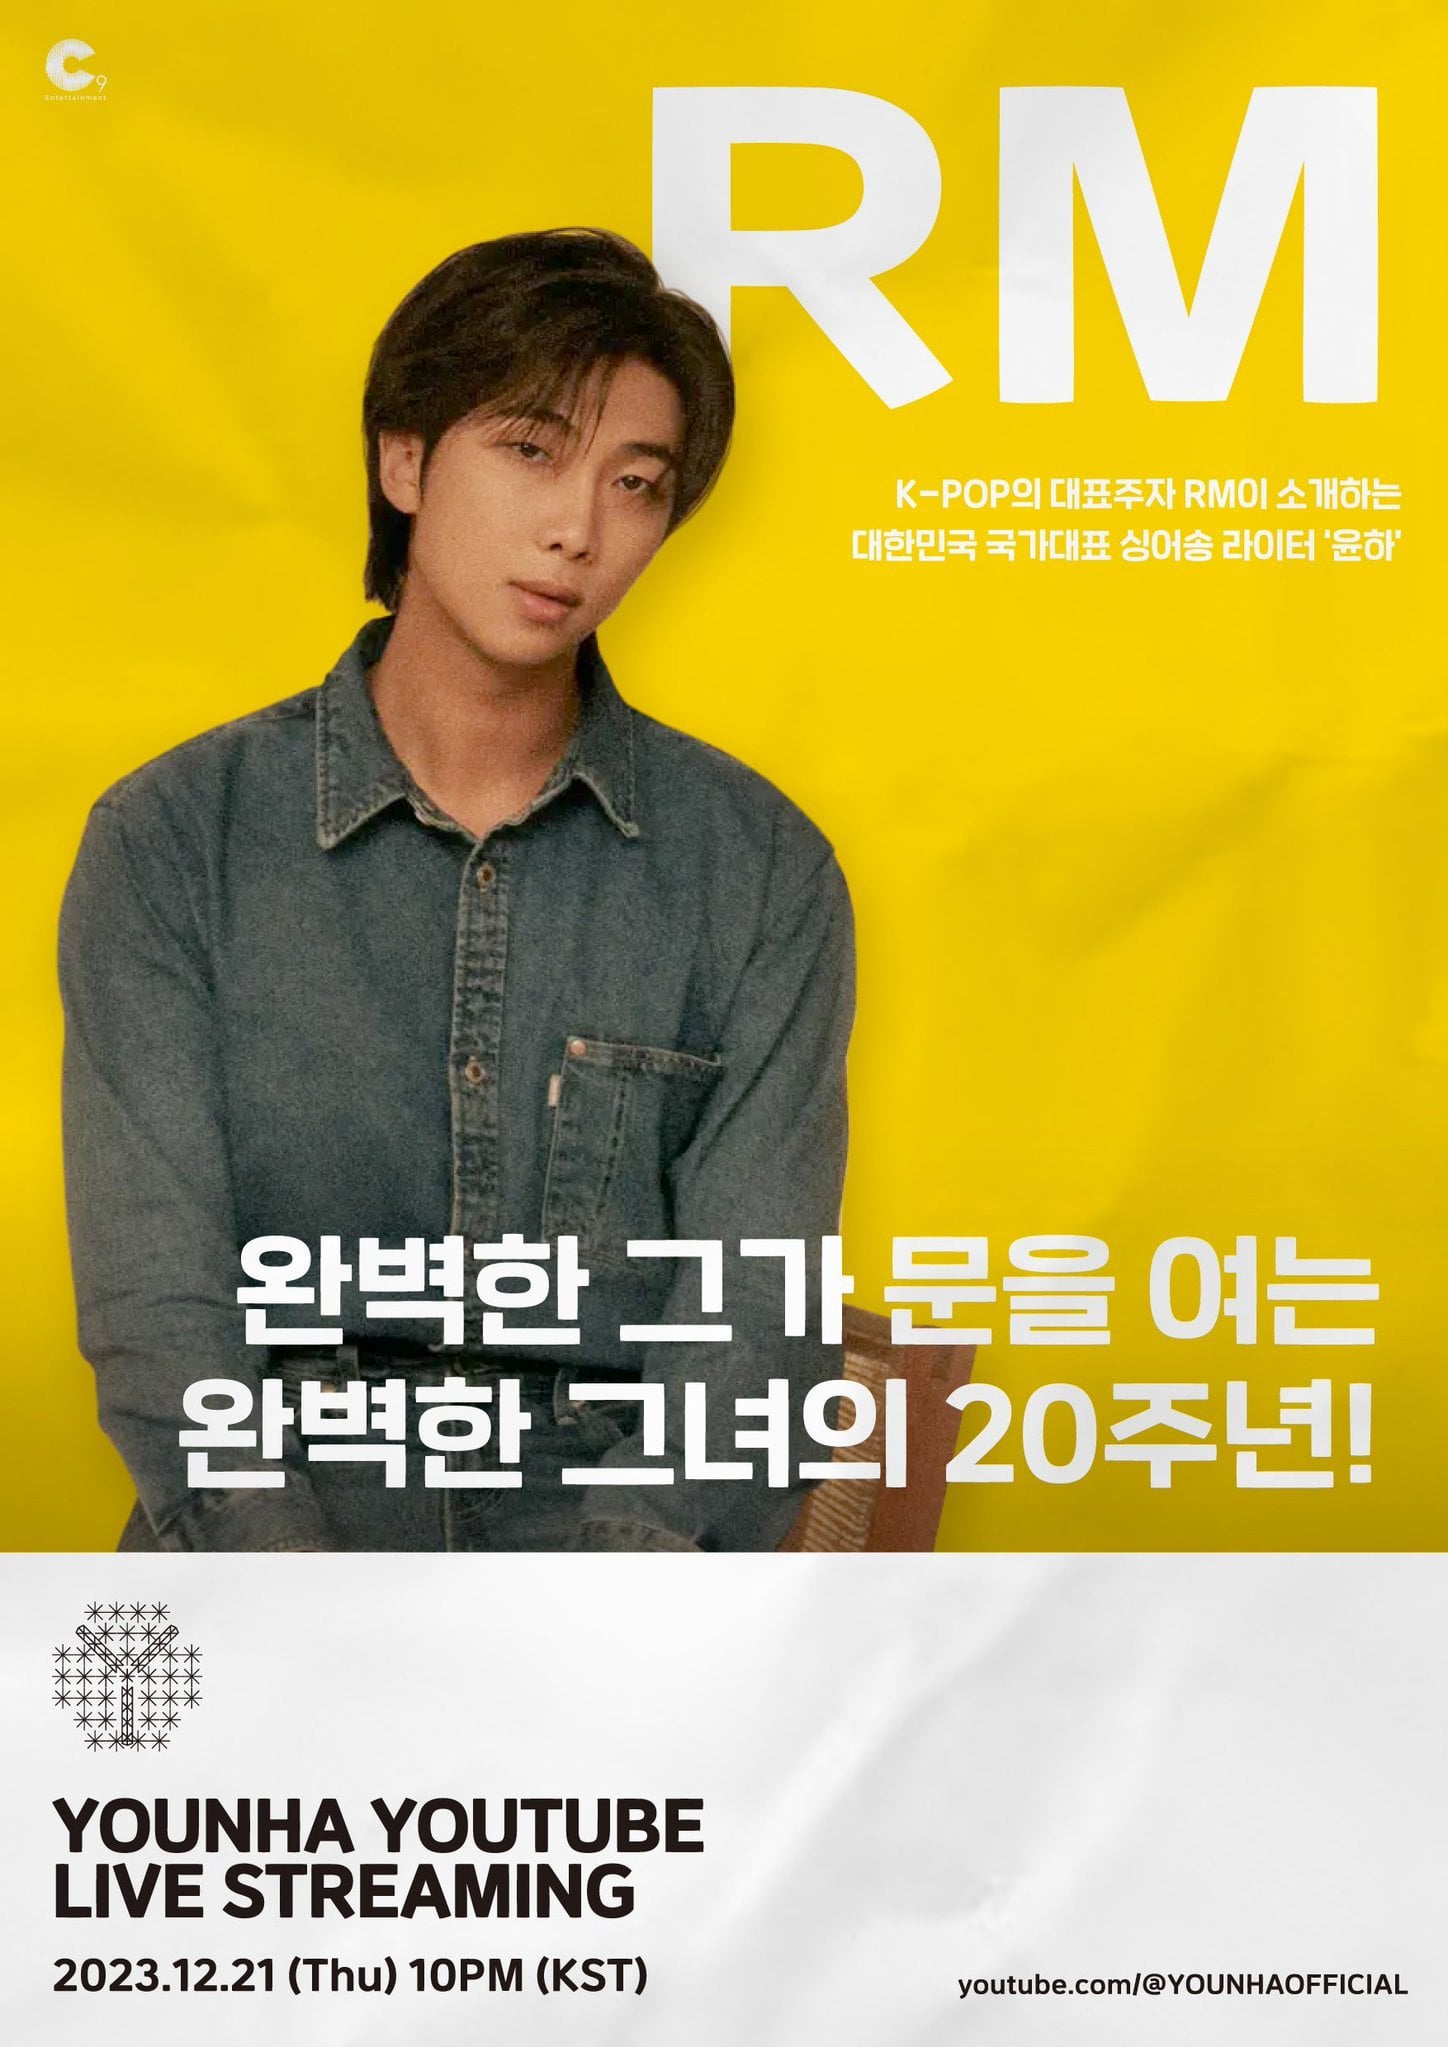 231208 C9 Entertainment: YOUNHA 20th ANNIVERSARY UNPACKED EVENT “Y” GUEST LINE-UP “RM of BTS” 2023. 12. 21 (Thu) PM 10:00(KST)